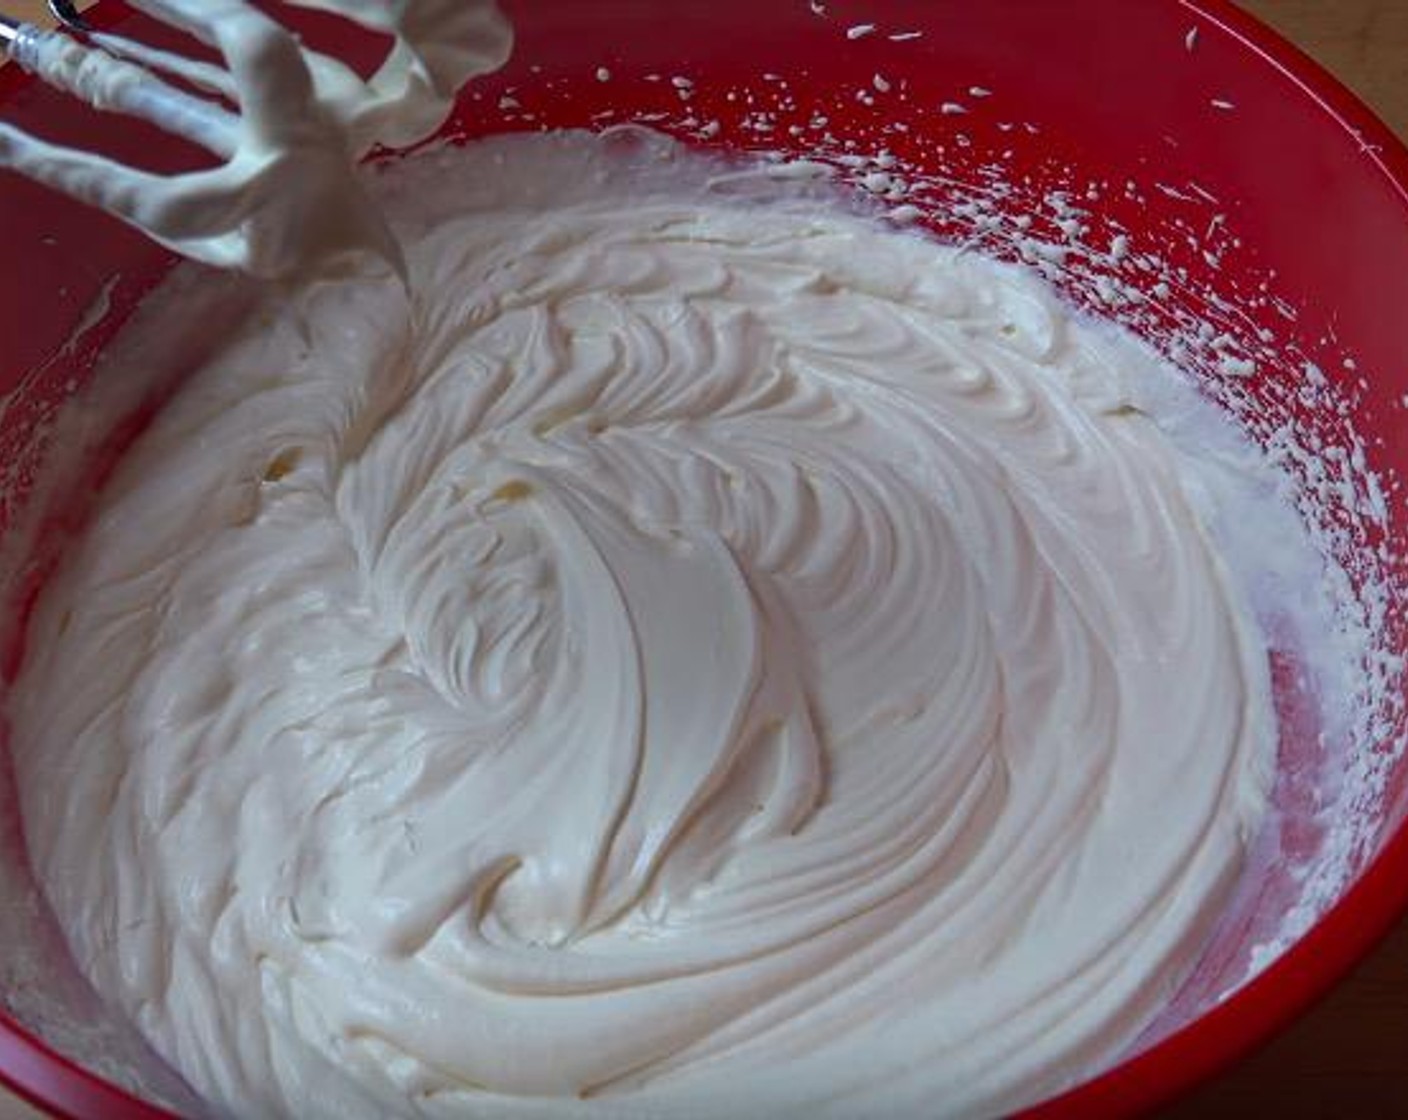 step 2 In a large mixing bowl, combine Whipping Cream (2 1/2 cups) and Sweetened Condensed Milk (2/3 cup). Beat together until the mixture forms soft peaks.